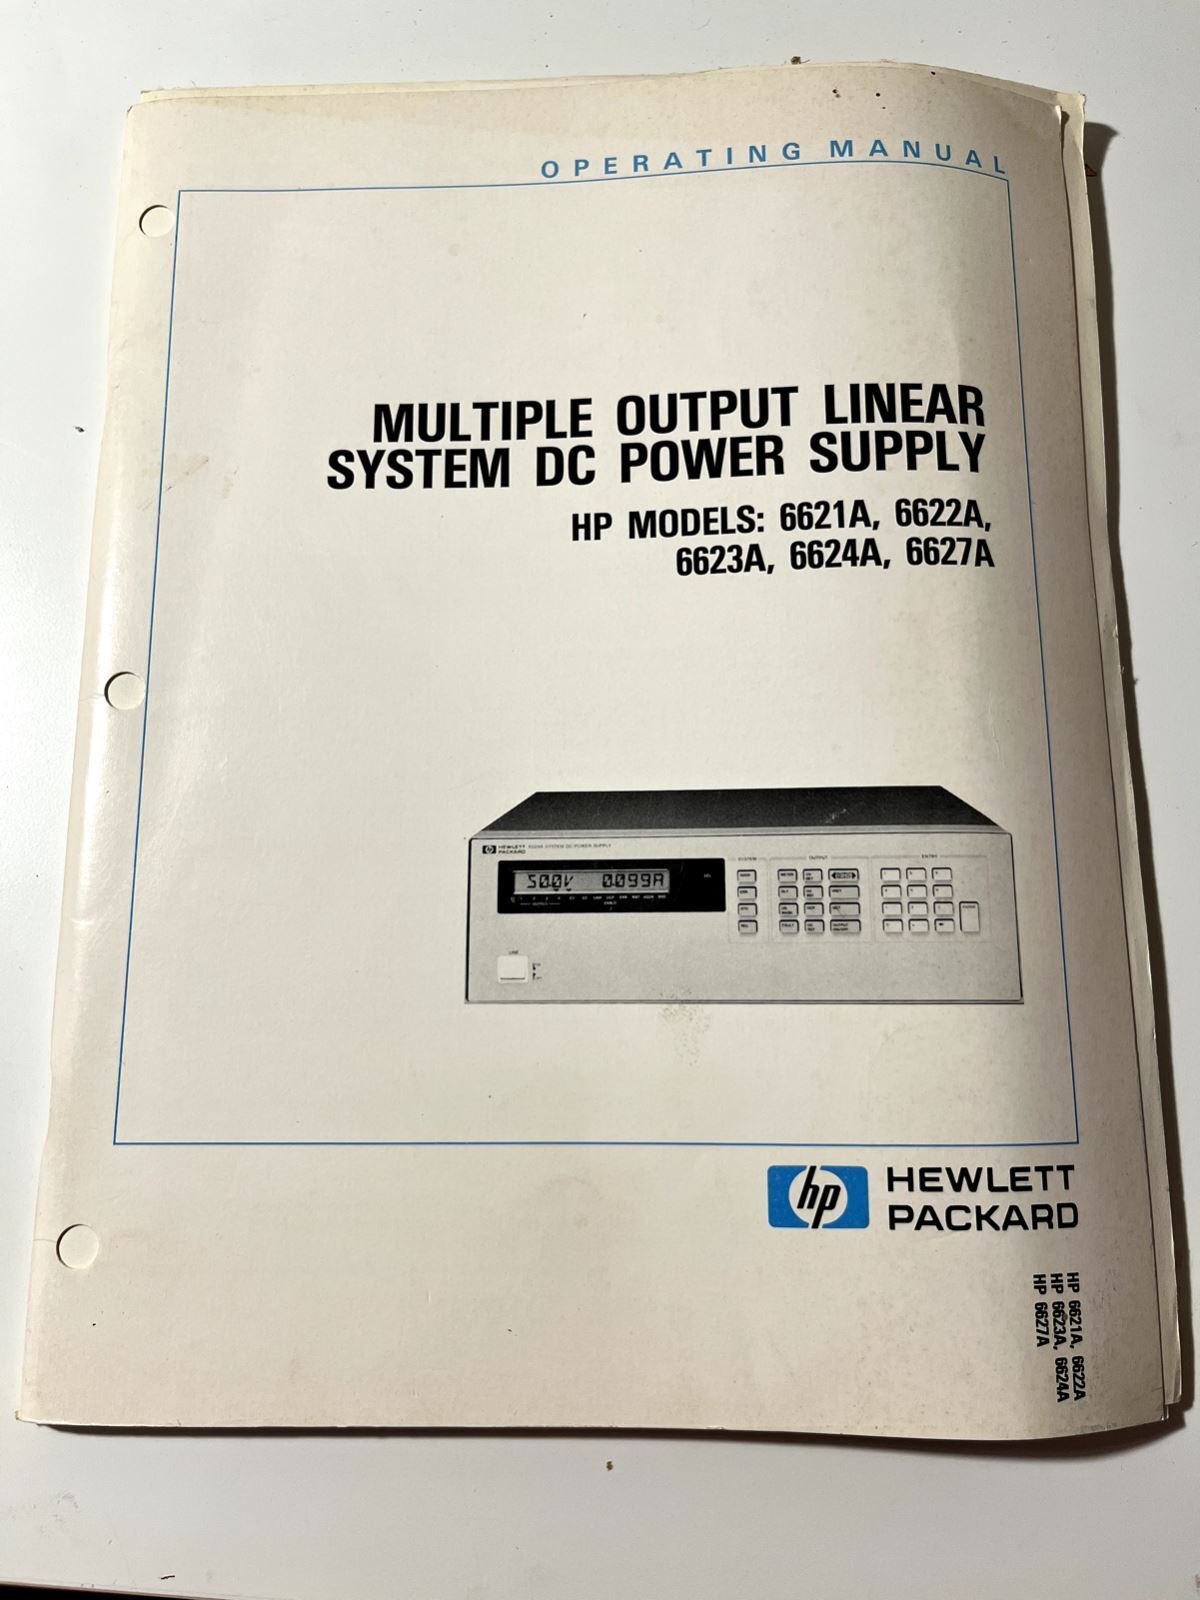 HP Multiple Output Linear System DC Power Supply Operating Manual